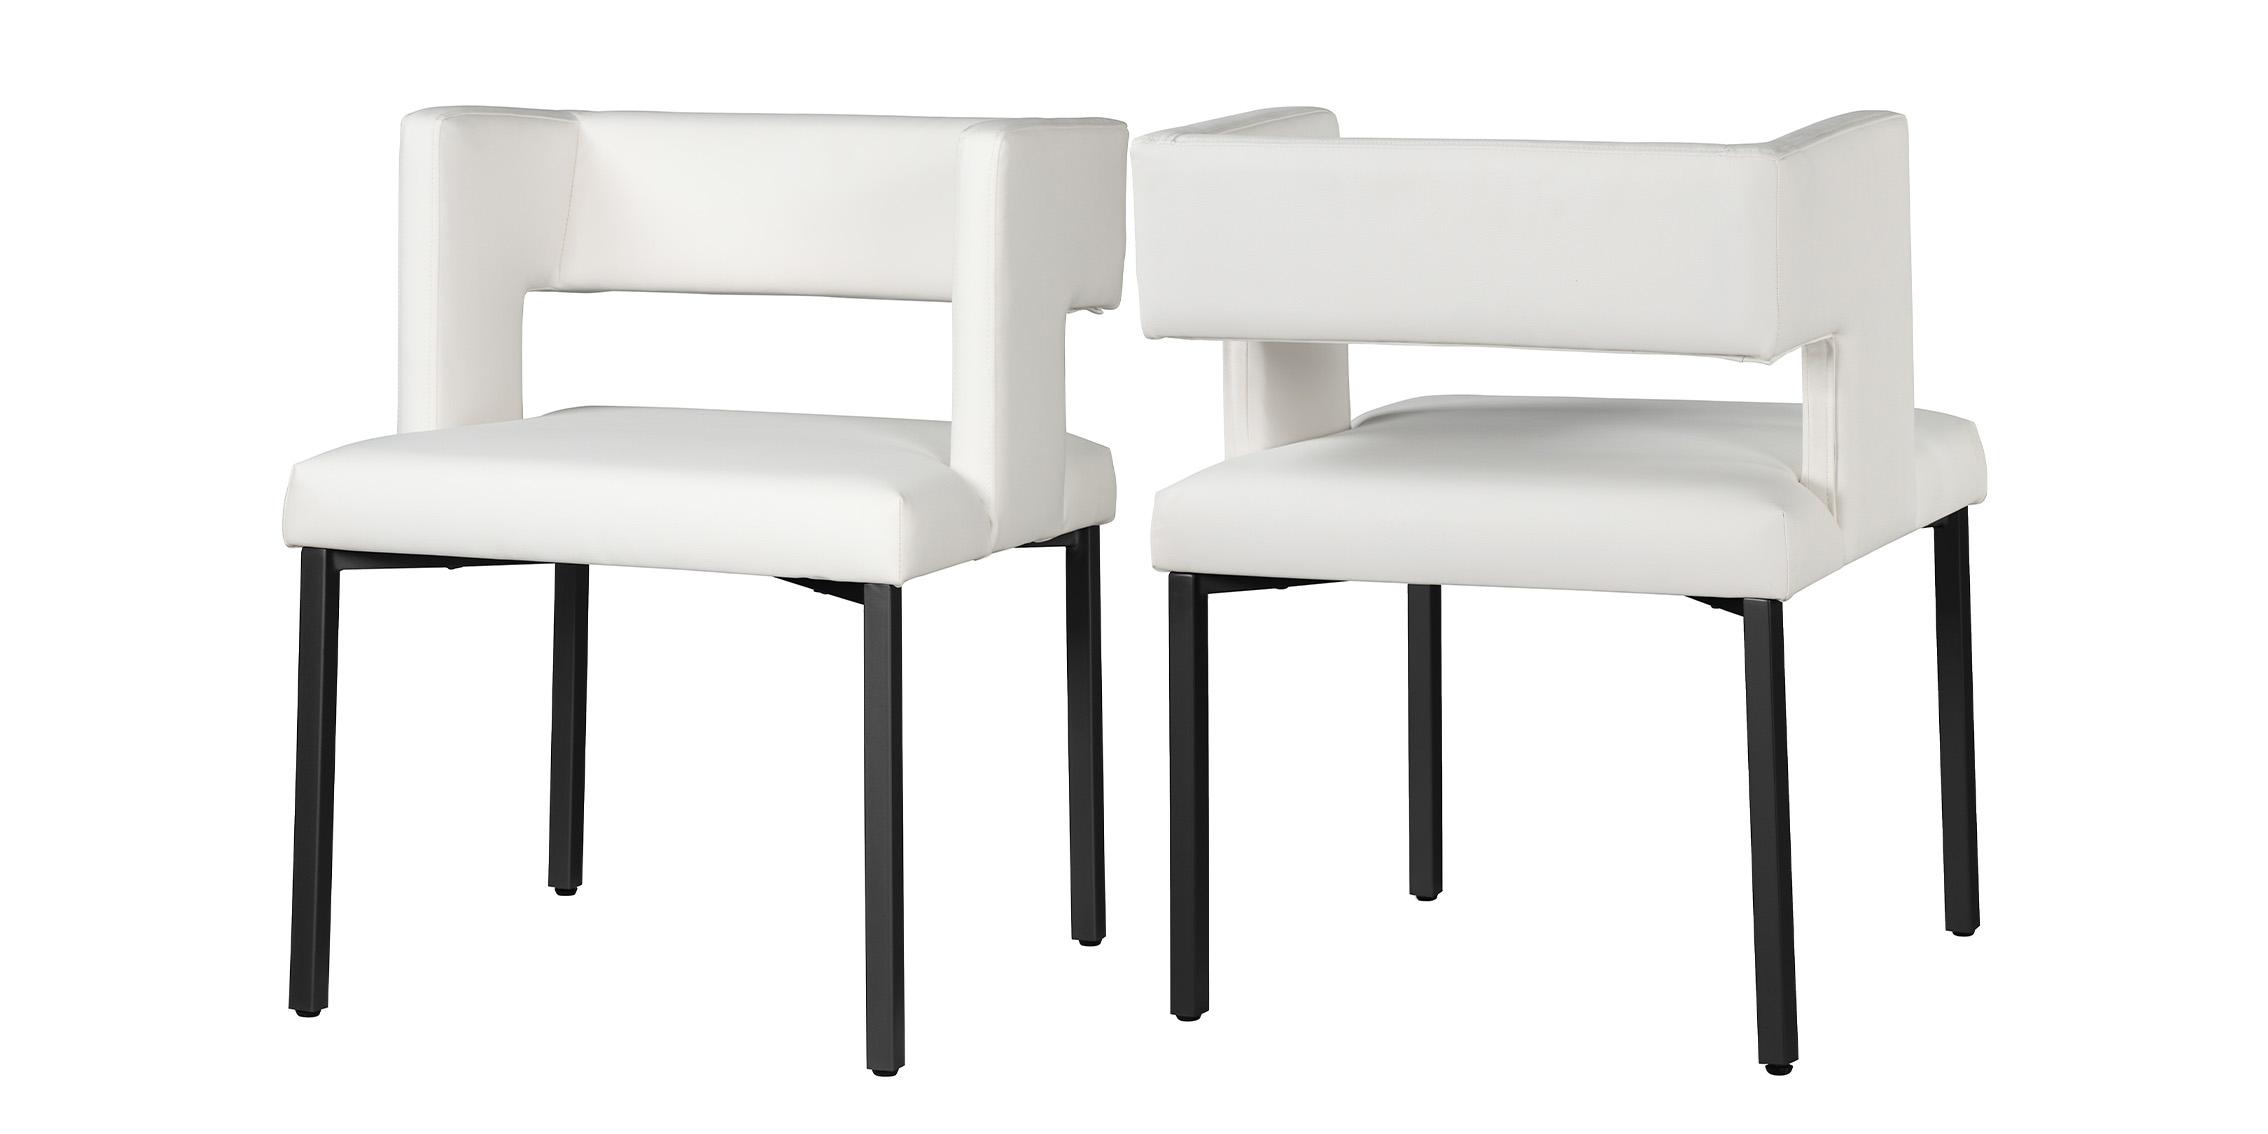 Contemporary, Modern Dining Chair Set CALEB 968White-C 968White-C in White, Black Faux Leather